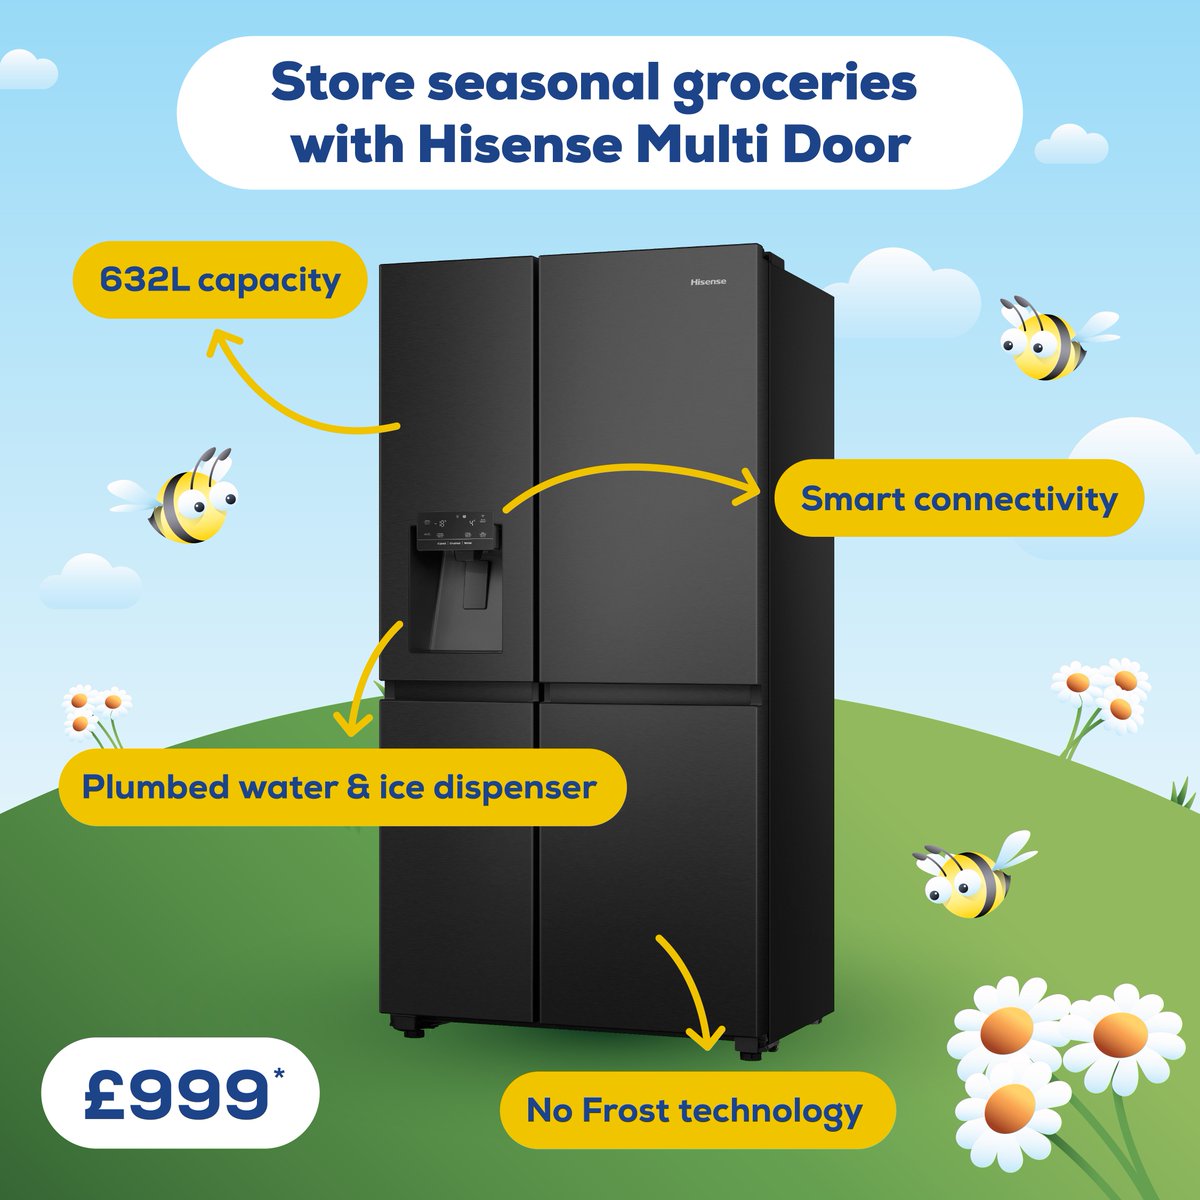 Store groceries in the RS818N4IFE multi-door fridge freezer from #Hisense. Featuring No Frost, a 632L capacity, and a plumbed water and ice dispenser, it's perfect for families. Shop locally, online > euronics.la/3PDnZVf #TheHomeofElectricals *Price correct at time of post